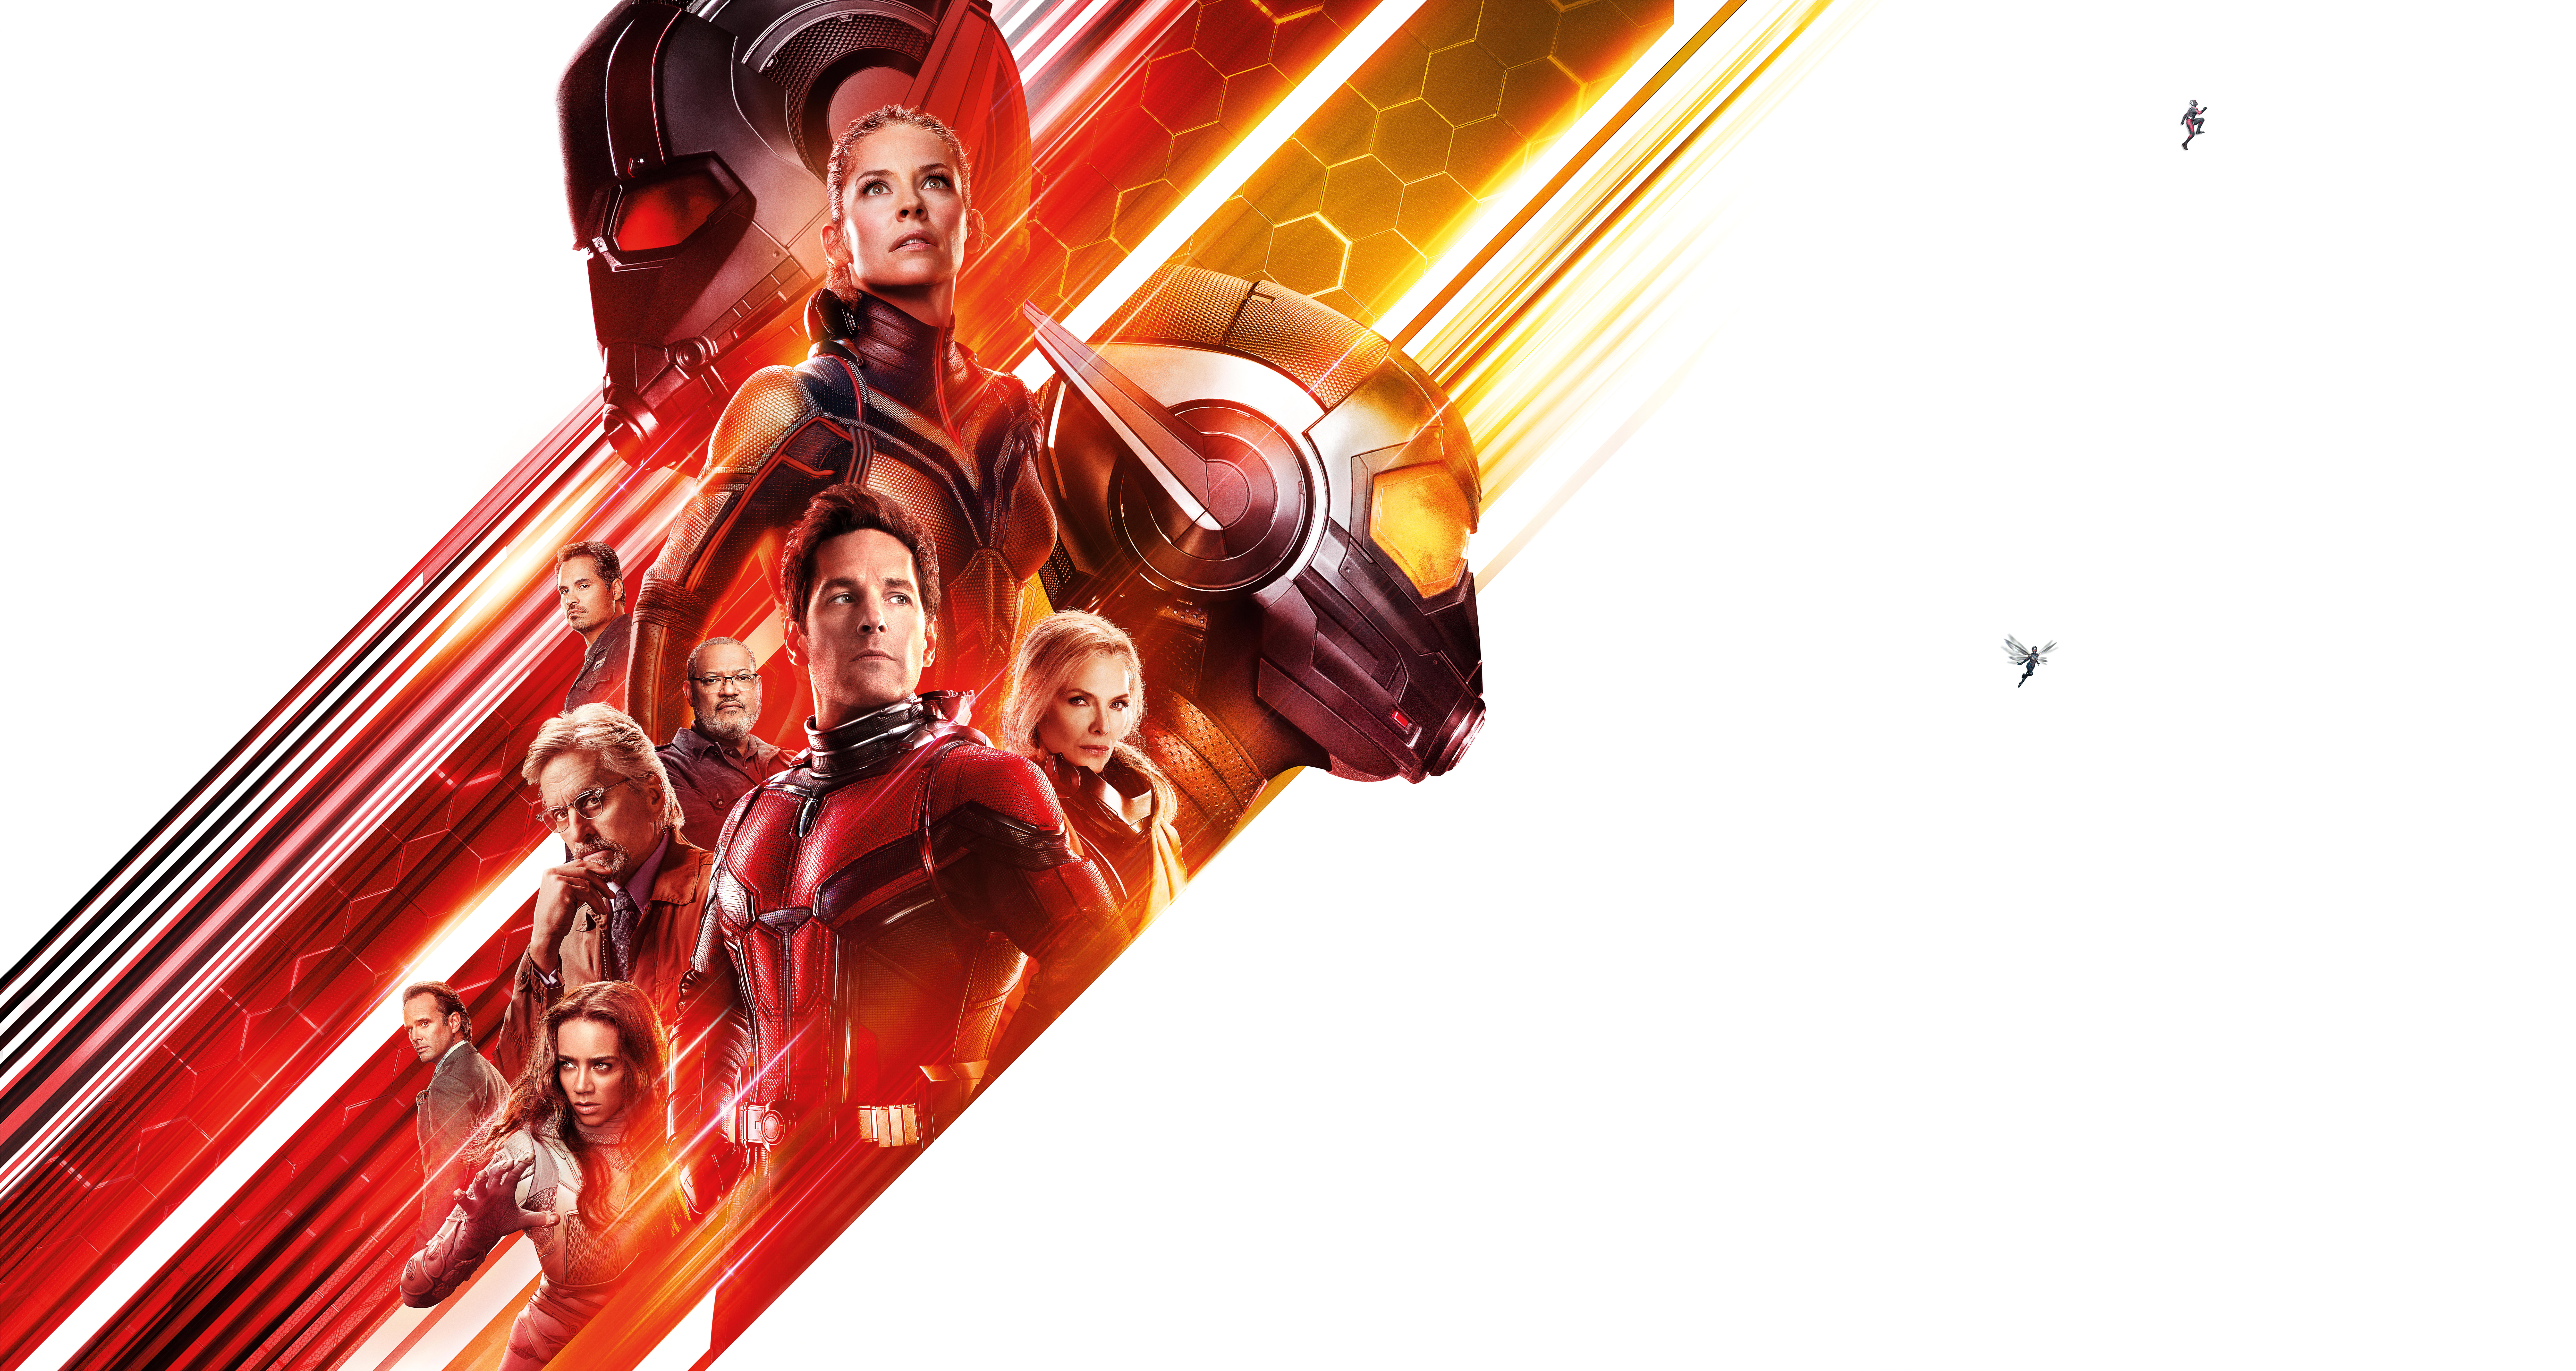 Movie Ant-Man and the Wasp 8k Ultra HD Wallpaper